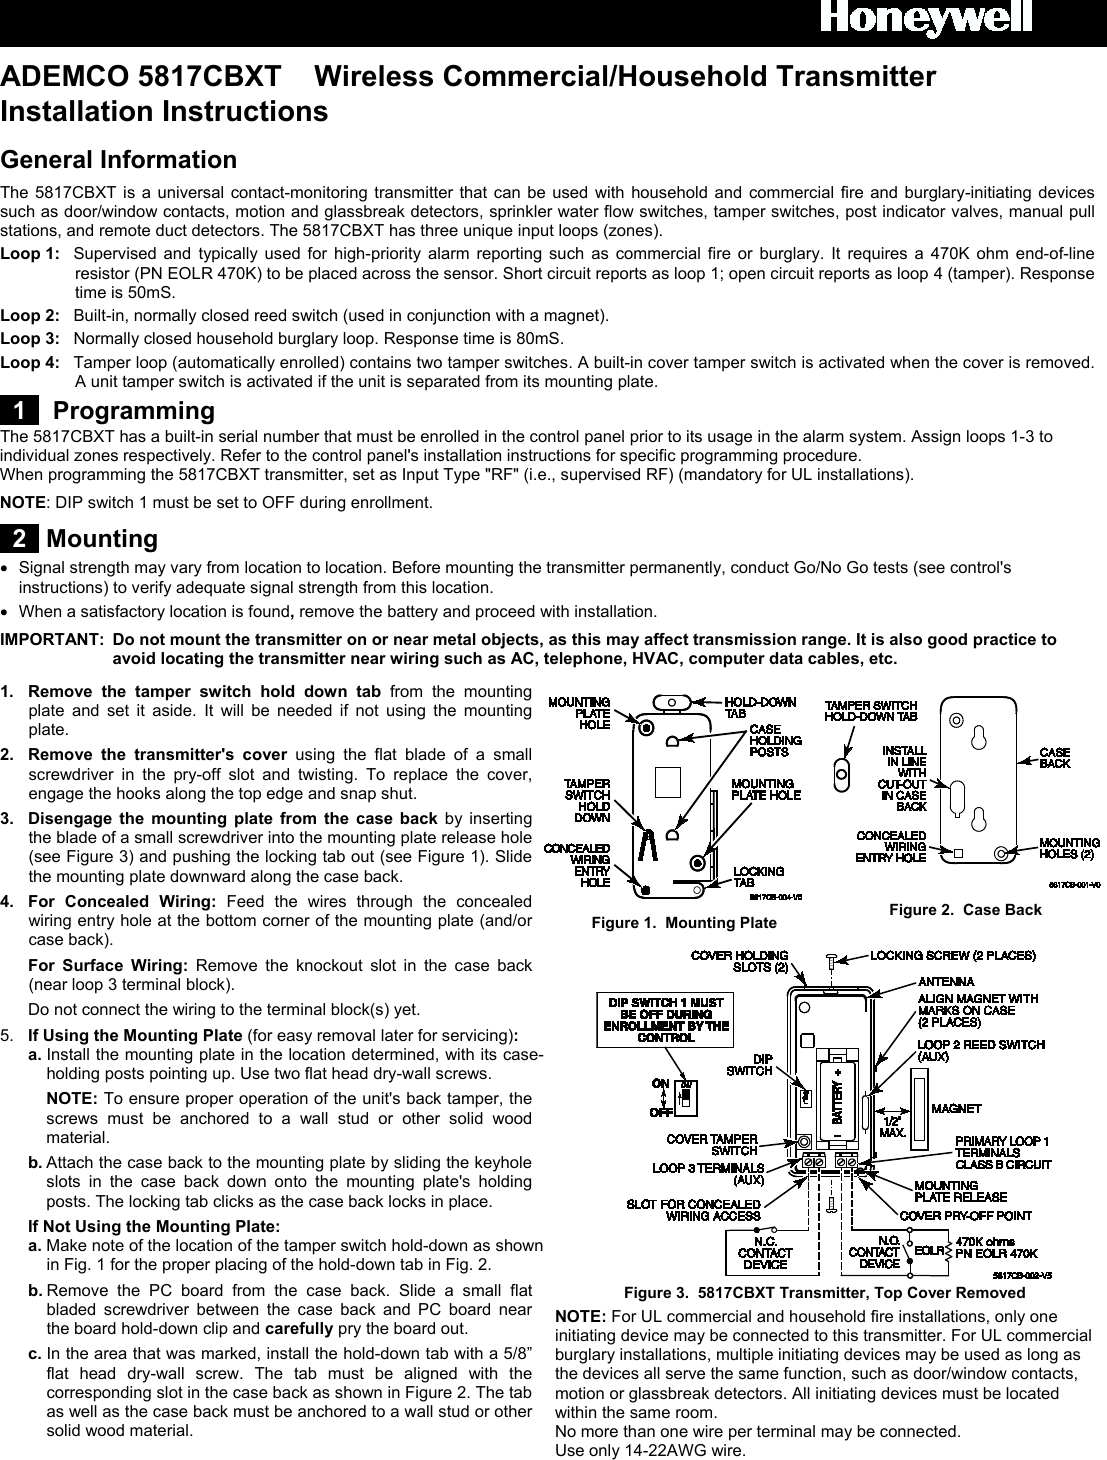  ADEMCO 5817CBXT    Wireless Commercial/Household Transmitter  Installation Instructions General Information The 5817CBXT  is a universal contact-monitoring transmitter that can be used with household and commercial fire and burglary-initiating devices such as door/window contacts, motion and glassbreak detectors, sprinkler water flow switches, tamper switches, post indicator valves, manual pull stations, and remote duct detectors. The 5817CBXT has three unique input loops (zones).  Loop 1:  Supervised and typically used for high-priority alarm reporting such as commercial fire or burglary. It requires a 470K ohm end-of-line resistor (PN EOLR 470K) to be placed across the sensor. Short circuit reports as loop 1; open circuit reports as loop 4 (tamper). Response time is 50mS. Loop 2: Built-in, normally closed reed switch (used in conjunction with a magnet). Loop 3:  Normally closed household burglary loop. Response time is 80mS. Loop 4: Tamper loop (automatically enrolled) contains two tamper switches. A built-in cover tamper switch is activated when the cover is removed. A unit tamper switch is activated if the unit is separated from its mounting plate.   1   Programming  The 5817CBXT has a built-in serial number that must be enrolled in the control panel prior to its usage in the alarm system. Assign loops 1-3 to individual zones respectively. Refer to the control panel&apos;s installation instructions for specific programming procedure.  When programming the 5817CBXT transmitter, set as Input Type &quot;RF&quot; (i.e., supervised RF) (mandatory for UL installations). NOTE: DIP switch 1 must be set to OFF during enrollment.  2  Mounting •  Signal strength may vary from location to location. Before mounting the transmitter permanently, conduct Go/No Go tests (see control&apos;s instructions) to verify adequate signal strength from this location.  •  When a satisfactory location is found, remove the battery and proceed with installation. IMPORTANT: Do not mount the transmitter on or near metal objects, as this may affect transmission range. It is also good practice to avoid locating the transmitter near wiring such as AC, telephone, HVAC, computer data cables, etc.  1.  Remove the tamper switch hold down tab from the mounting plate  and set it aside.  It will be needed if not using the mounting plate. 2.  Remove the transmitter&apos;s cover using  the flat blade of a small screwdriver in the pry-off slot and twisting. To replace the cover, engage the hooks along the top edge and snap shut. 3.  Disengage the mounting plate from the case back by inserting the blade of a small screwdriver into the mounting plate release hole (see Figure 3) and pushing the locking tab out (see Figure 1). Slide the mounting plate downward along the case back.  4. For  Concealed Wiring:  Feed the wires through the concealed wiring entry hole at the bottom corner of the mounting plate (and/or case back).  For  Surface Wiring:  Remove the knockout slot in the case back (near loop 3 terminal block).    Do not connect the wiring to the terminal block(s) yet. 5.  If Using the Mounting Plate (for easy removal later for servicing):   a. Install the mounting plate in the location determined, with its case-holding posts pointing up. Use two flat head dry-wall screws.     NOTE: To ensure proper operation of the unit&apos;s back tamper, the screws must be anchored to a wall stud or other solid wood material.  b. Attach the case back to the mounting plate by sliding the keyhole slots in the case back down onto the mounting plate&apos;s holding posts. The locking tab clicks as the case back locks in place.  If Not Using the Mounting Plate:  a. Make note of the location of the tamper switch hold-down as shown in Fig. 1 for the proper placing of the hold-down tab in Fig. 2.  b. Remove the PC board from the case back. Slide a small flat bladed screwdriver between the case back and PC board near the board hold-down clip and carefully pry the board out.   c. In the area that was marked, install the hold-down tab with a 5/8” flat head dry-wall screw. The tab must be aligned with the corresponding slot in the case back as shown in Figure 2. The tab as well as the case back must be anchored to a wall stud or other solid wood material.      Figure 1.  Mounting Plate  Figure 2.  Case Back  Figure 3.  5817CBXT Transmitter, Top Cover Removed  NOTE: For UL commercial and household fire installations, only one initiating device may be connected to this transmitter. For UL commercial burglary installations, multiple initiating devices may be used as long as the devices all serve the same function, such as door/window contacts, motion or glassbreak detectors. All initiating devices must be located within the same room. No more than one wire per terminal may be connected. Use only 14-22AWG wire.  